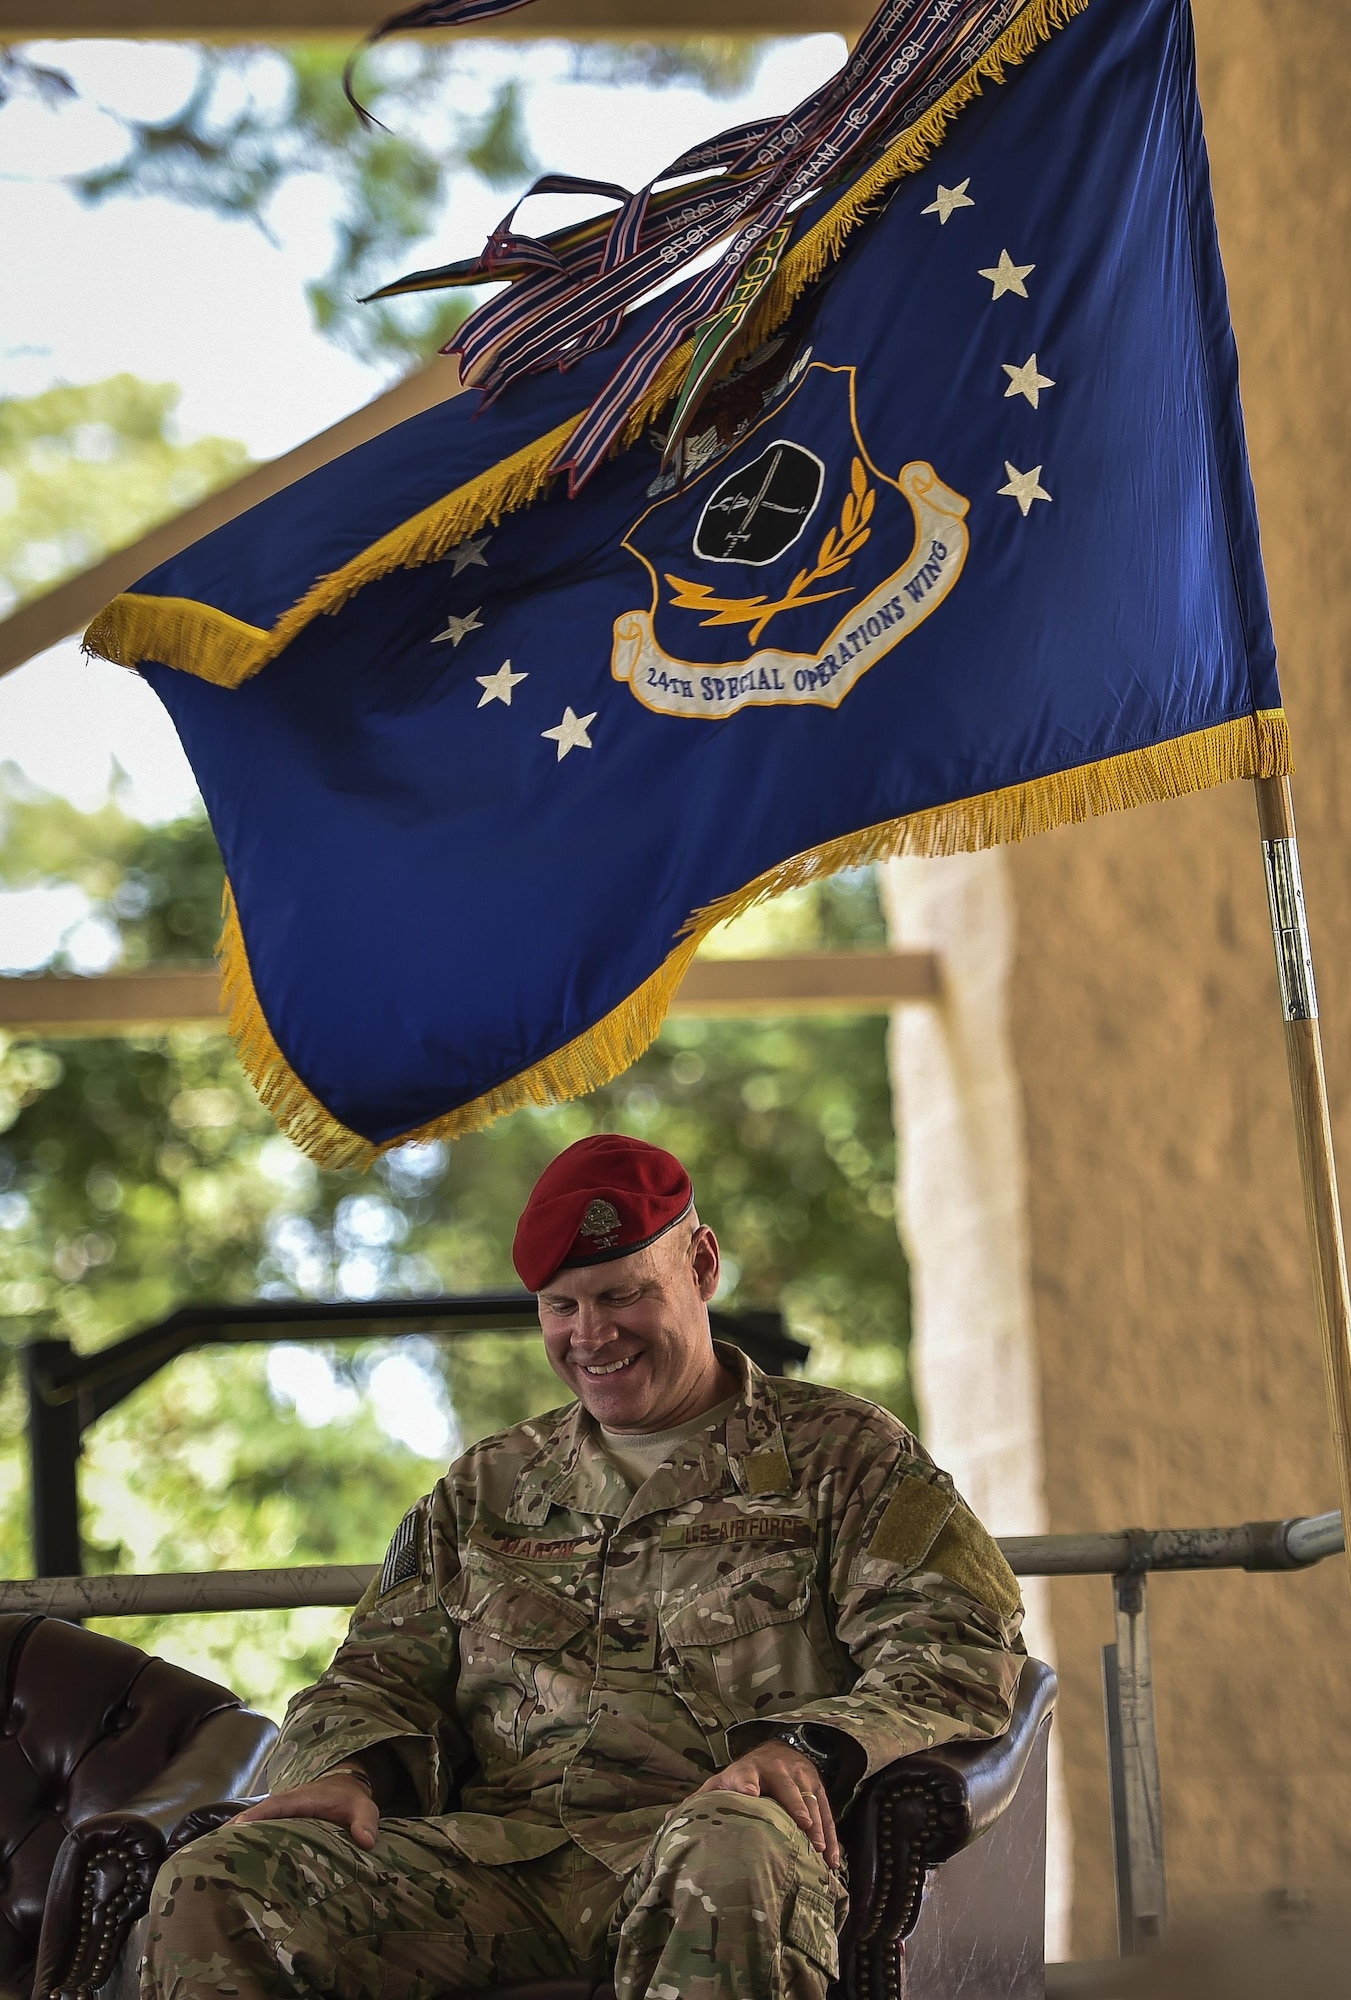 Col. Michael Martin, commander of the 24th Special Operations Wing, reacts to remarks made by Lt. Gen. Brad Heithold, commander of Air Force Special Operations Command, during the 24th SOW assumption of command at Hurlburt Field, Fla., July 14, 2016. Martin is the third Airman to take command of the 24th SOW since its activation in 2012. (U.S. Air Force photo by Senior Airman Ryan Conroy) 